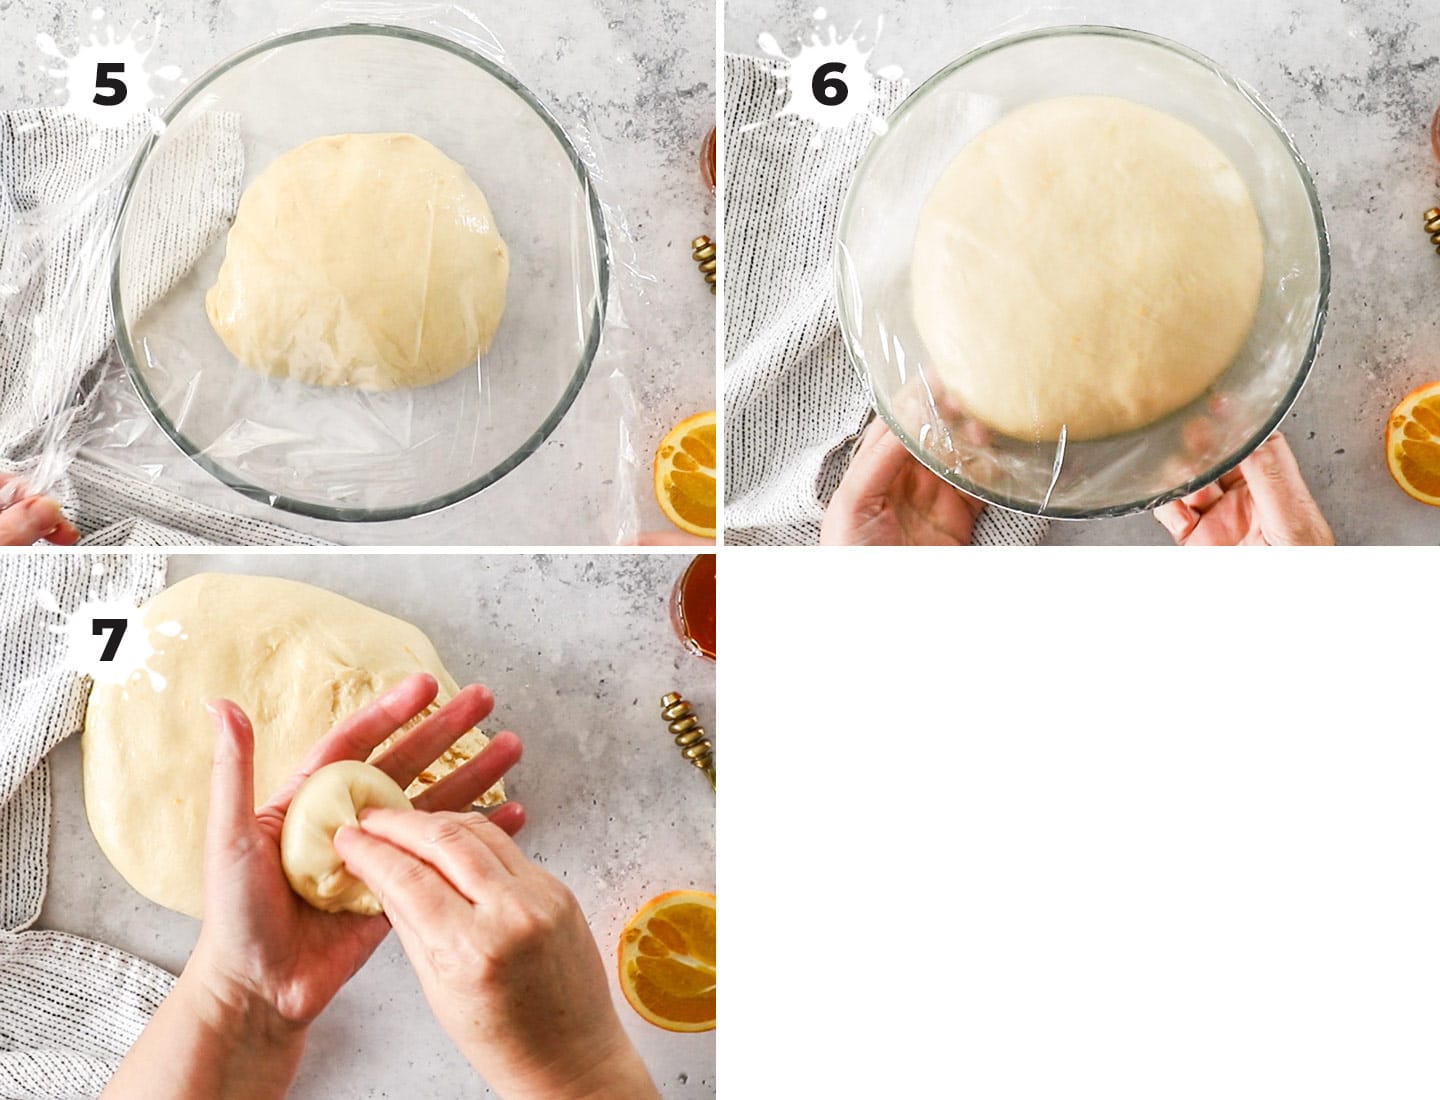 A collage showing how to form Maritozzi buns.